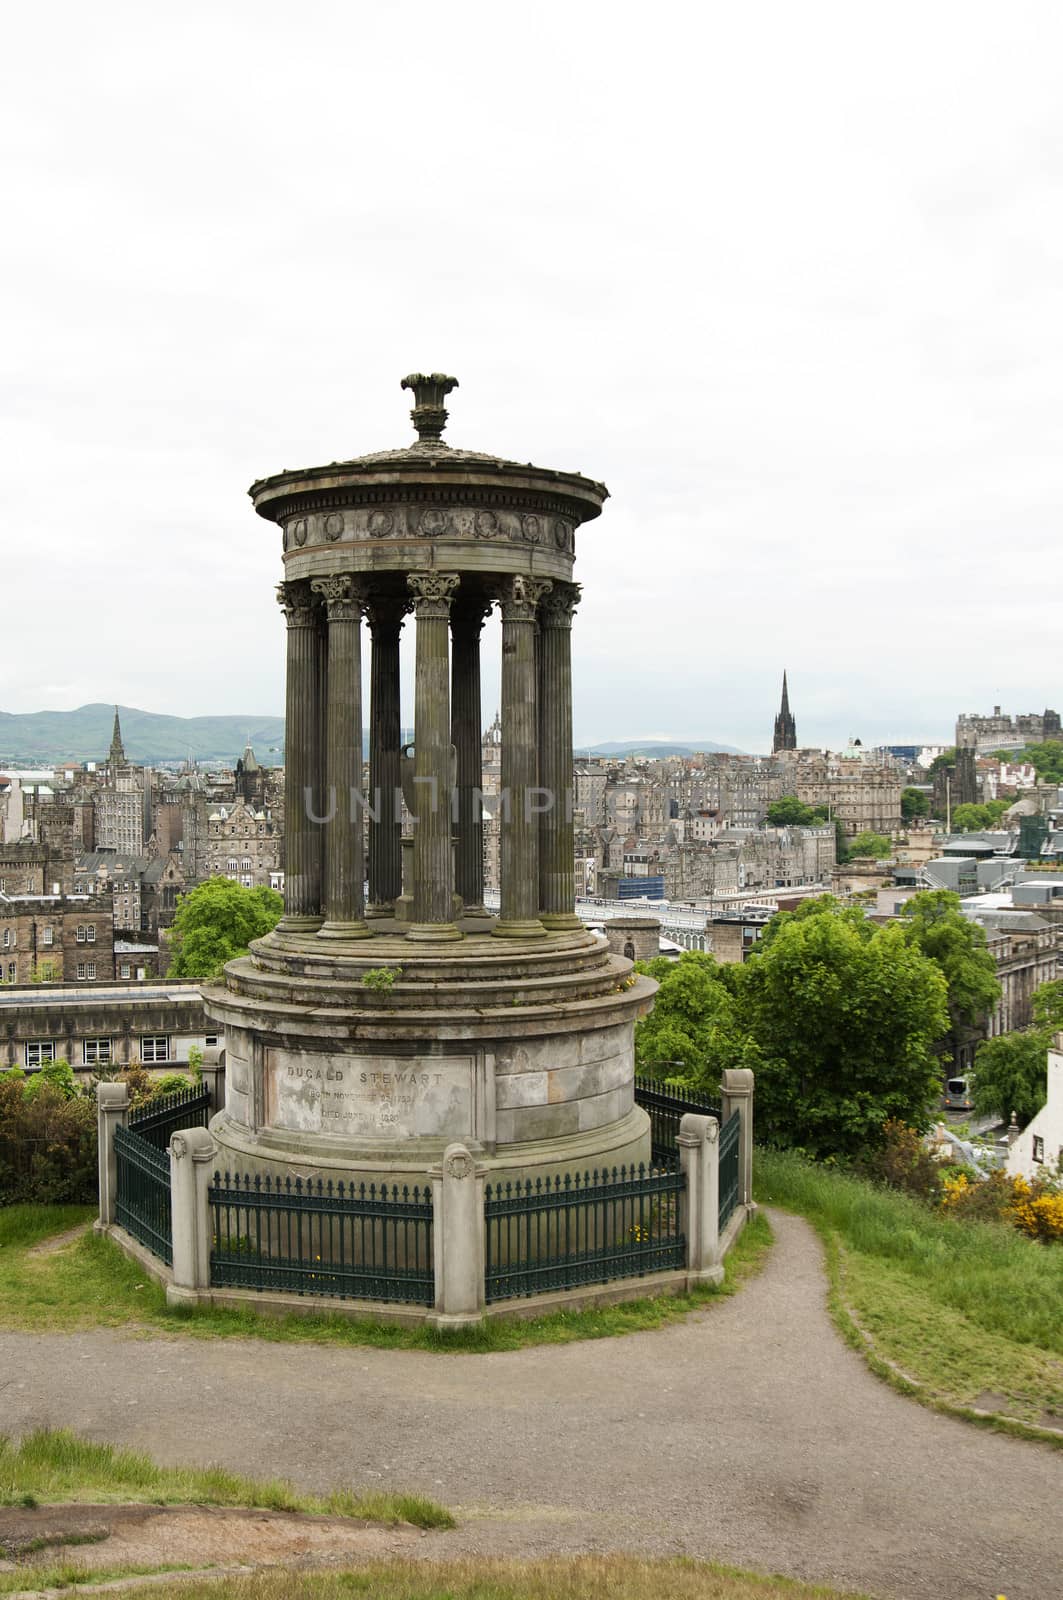 The Dugald Stewart Monument and the City of Edinburgh in the bac by rodrigobellizzi